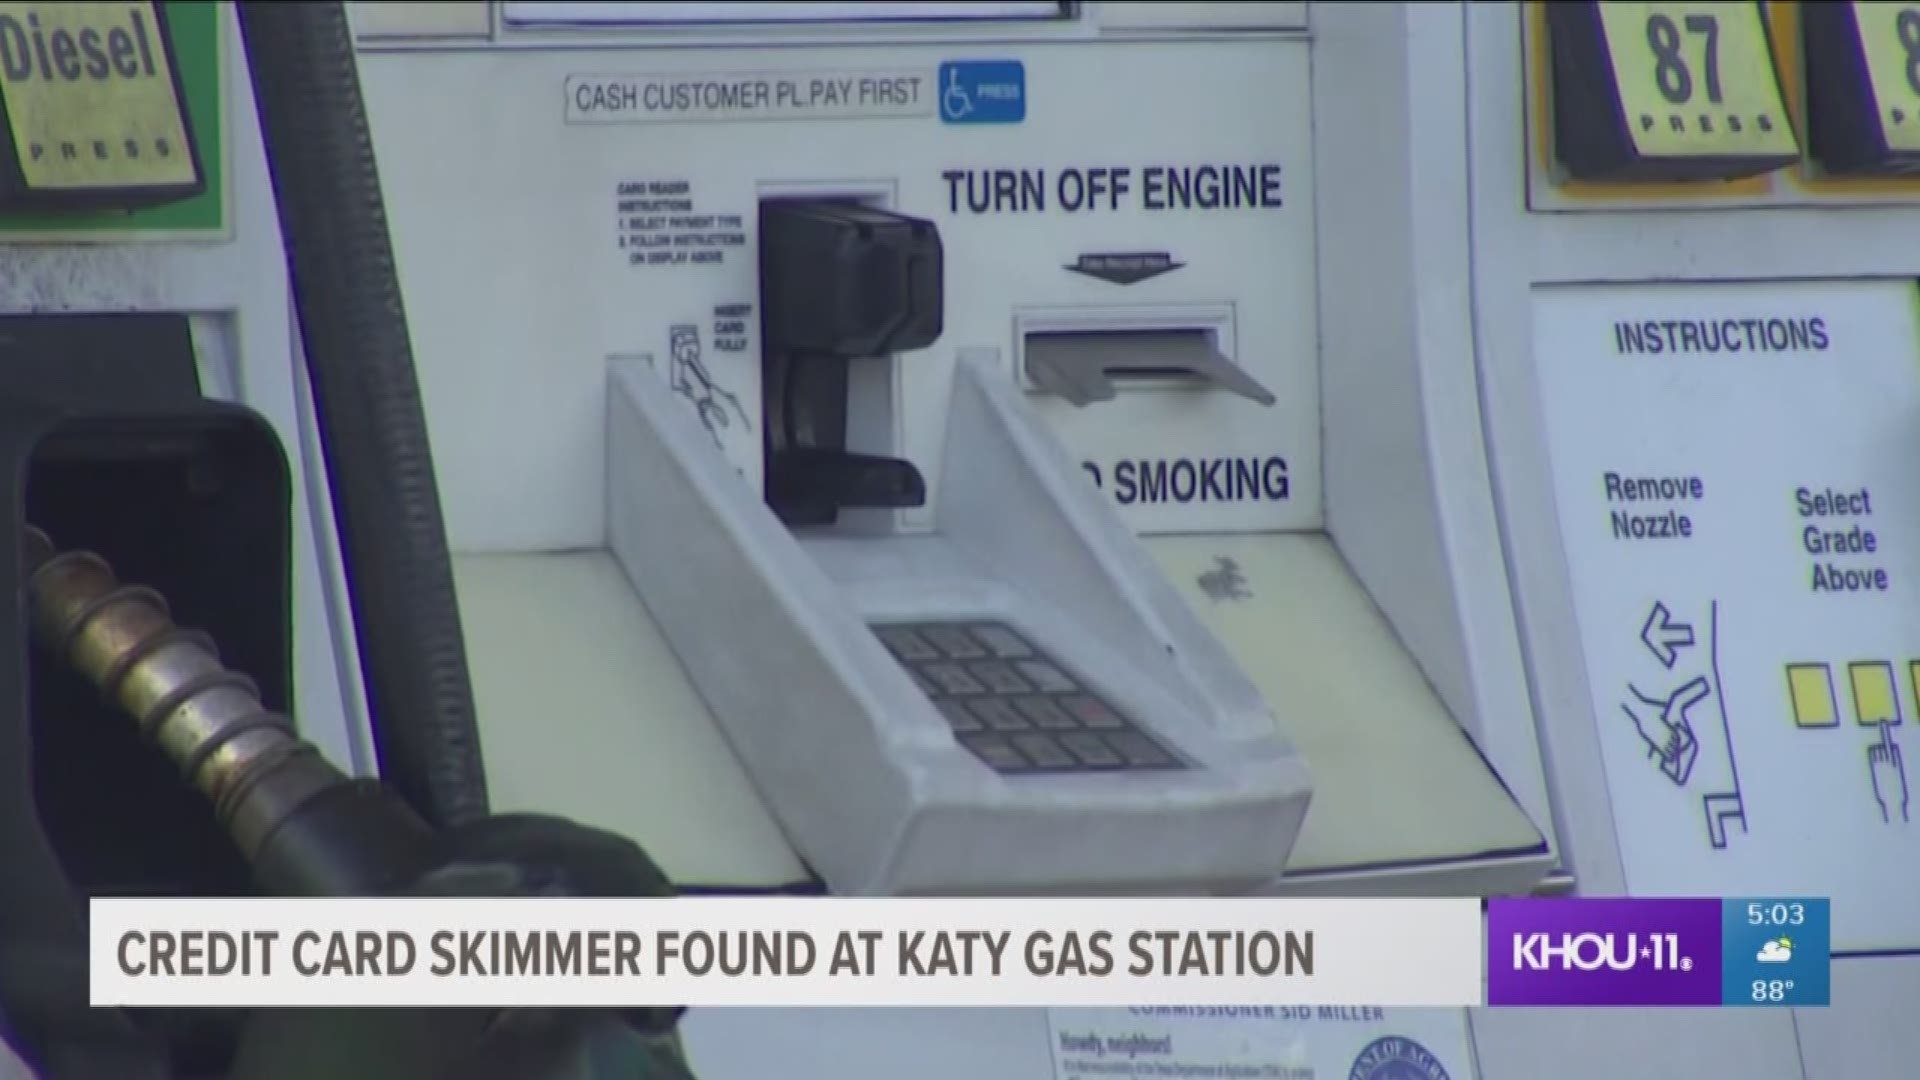 Authorities are investigating after three skimmers were recently found at a Katy gas station.